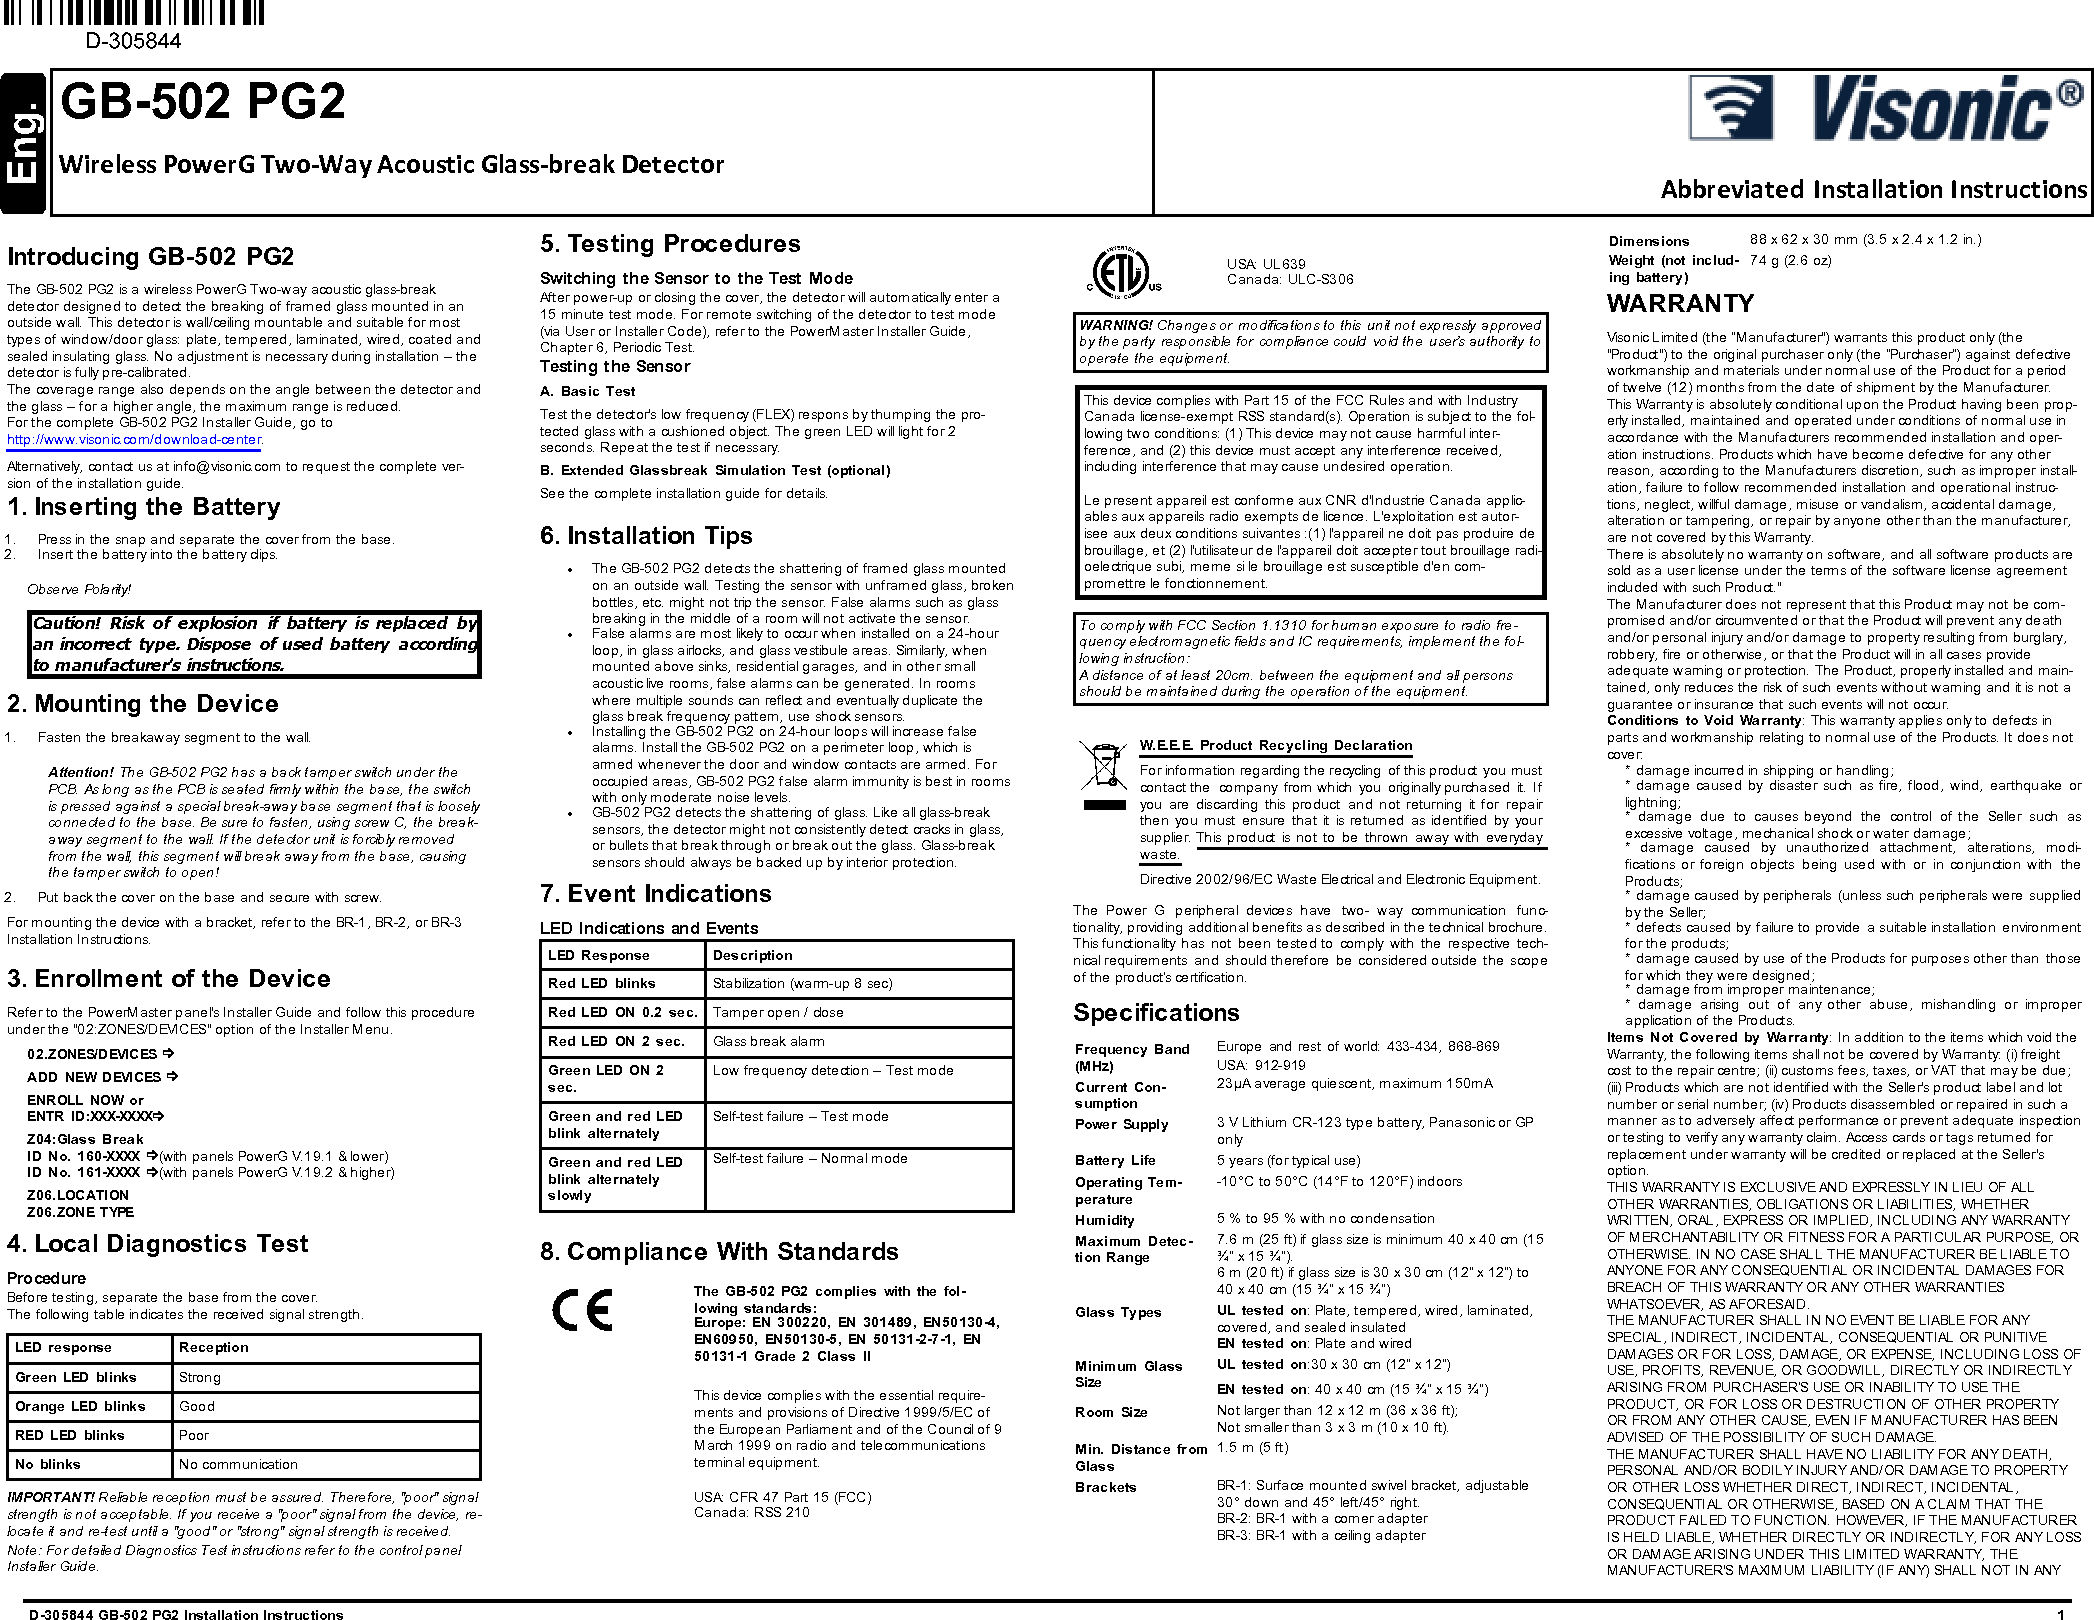 GB-502 PG2Wireless PowerG Two-Way Acoustic Glass-break DetectorAbbreviated Installation InstructionsD-305844 GB-502 PG2 Installation Instructions 1Introducing GB-502 PG2The GB-502 PG2 is a wireless PowerG Two-way acoustic glass-breakdetector designed to detect the breaking of framed glass mounted in anoutside wall. This detector is wall/ceiling mountable and suitable for mosttypes of window/door glass: plate, tempered, laminated, wired, coated andsealed insulating glass. No adjustment is necessary during installation – thedetector is fully pre-calibrated.The coverage range also depends on the angle between the detector andthe glass – for a higher angle, the maximum range is reduced.For the complete GB-502 PG2 Installer Guide, go tohttp://www.visonic.com/download-center.Alternatively, contact us at info@visonic.com to request the complete ver-sion of the installation guide.1. Inserting the Battery1. Press in the snap and separate the cover from the base.2. Insert the battery into the battery clips.Observe Polarity!Caution! Risk of explosion if battery is replaced byan incorrect type. Dispose of used battery accordingto manufacturer&apos;s instructions.2. Mounting the Device1. Fasten the breakaway segment to the wall.Attention! The GB-502 PG2 has a back tamper switch under thePCB. As long as the PCB is seated firmly within the base, the switchis pressed against a special break-away base segment that is looselyconnected to the base. Be sure to fasten, using screw C, the break-away segment to the wall. If the detector unit is forcibly removedfrom the wall, this segment will break away from the base, causingthe tamper switch to open!2. Put back the cover on the base and secure with screw.For mounting the device with a bracket, refer to the BR-1, BR-2, or BR-3Installation Instructions.3. Enrollment of the DeviceRefer to the PowerMaster panel&apos;s Installer Guide and follow this procedureunder the &quot;02:ZONES/DEVICES&quot; option of the Installer Menu.02.ZONES/DEVICES ðADD NEW DEVICES ðENROLL NOW orENTR ID:XXX-XXXXðZ04:Glass BreakID No. 160-XXXX ð(with panels PowerG V.19.1 &amp; lower)ID No. 161-XXXX ð(with panels PowerG V.19.2 &amp; higher)Z06.LOCATIONZ06.ZONE TYPE4. Local Diagnostics TestProcedureBefore testing, separate the base from the cover.The following table indicates the received signal strength.LED response ReceptionGreen LED blinks StrongOrange LED blinks GoodRED LED blinks PoorNo blinks No communicationIMPORTANT! Reliable reception must be assured. Therefore, &quot;poor&quot; signalstrength is not acceptable. If you receive a &quot;poor&quot; signal from the device, re-locate it and re-test until a &quot;good&quot; or &quot;strong&quot; signal strength is received.Note: For detailed Diagnostics Test instructions refer to the control panelInstaller Guide.5. Testing ProceduresSwitching the Sensor to the Test ModeAfter power-up or closing the cover, the detector will automatically enter a15 minute test mode. For remote switching of the detector to test mode(via User or Installer Code), refer to the PowerMaster Installer Guide,Chapter 6, Periodic Test.Testing the SensorA. Basic TestTest the detector&apos;s low frequency (FLEX) respons by thumping the pro-tected glass with a cushioned object. The green LED will light for 2seconds. Repeat the test if necessary.B. Extended Glassbreak Simulation Test (optional)See the complete installation guide for details.6. Installation TipslThe GB-502 PG2 detects the shattering of framed glass mountedon an outside wall. Testing the sensor with unframed glass, brokenbottles, etc. might not trip the sensor. False alarms such as glassbreaking in the middle of a room will not activate the sensor.lFalse alarms are most likely to occur when installed on a 24-hourloop, in glass airlocks, and glass vestibule areas. Similarly, whenmounted above sinks, residential garages, and in other smallacoustic live rooms, false alarms can be generated. In roomswhere multiple sounds can reflect and eventually duplicate theglass break frequency pattern, use shock sensors.lInstalling the GB-502 PG2 on 24-hour loops will increase falsealarms. Install the GB-502 PG2 on a perimeter loop, which isarmed whenever the door and window contacts are armed. Foroccupied areas, GB-502 PG2 false alarm immunity is best in roomswith only moderate noise levels.lGB-502 PG2 detects the shattering of glass. Like all glass-breaksensors, the detector might not consistently detect cracks in glass,or bullets that break through or break out the glass. Glass-breaksensors should always be backed up by interior protection.7. Event IndicationsLED Indications and EventsLED Response DescriptionRed LED blinks Stabilization (warm-up 8 sec)Red LED ON 0.2 sec. Tamper open / closeRed LED ON 2 sec. Glass break alarmGreen LED ON 2sec.Low frequency detection – Test modeGreen and red LEDblink alternatelySelf-test failure – Test modeGreen and red LEDblink alternatelyslowlySelf-test failure – Normal mode8. Compliance With StandardsThe GB-502 PG2 complies with the fol-lowing standards:Europe: EN 300220, EN 301489, EN50130-4,EN60950, EN50130-5, EN 50131-2-7-1, EN50131-1 Grade 2 Class IIThis device complies with the essential require-ments and provisions of Directive 1999/5/EC ofthe European Parliament and of the Council of 9March 1999 on radio and telecommunicationsterminal equipment.USA: CFR 47 Part 15 (FCC)Canada: RSS 210USA: UL639Canada: ULC-S306WARNING! Changes or modifications to this unit not expressly approvedby the party responsible for compliance could void the user’s authority tooperate the equipment.This device complies with Part 15 of the FCC Rules and with IndustryCanada license-exempt RSS standard(s). Operation is subject to the fol-lowing two conditions: (1) This device may not cause harmful inter-ference, and (2) this device must accept any interference received,including interference that may cause undesired operation.Le present appareil est conforme aux CNR d&apos;Industrie Canada applic-ables aux appareils radio exempts de licence. L&apos;exploitation est autor-isee aux deux conditions suivantes :(1) l&apos;appareil ne doit pas produire debrouillage, et (2) l&apos;utilisateur de l&apos;appareil doit accepter tout brouillage radi-oelectrique subi, meme si le brouillage est susceptible d&apos;en com-promettre le fonctionnement.To comply with FCC Section 1.1310 for human exposure to radio fre-quency electromagnetic fields and IC requirements, implement the fol-lowing instruction:A distance of at least 20cm. between the equipment and all personsshould be maintained during the operation of the equipment.W.E.E.E. Product Recycling DeclarationFor information regarding the recycling of this product you mustcontact the company from which you originally purchased it. Ifyou are discarding this product and not returning it for repairthen you must ensure that it is returned as identified by yoursupplier. This product is not to be thrown away with everydaywaste.Directive 2002/96/EC Waste Electrical and Electronic Equipment.The Power G peripheral devices have two- way communication func-tionality, providing additional benefits as described in the technical brochure.This functionality has not been tested to comply with the respective tech-nical requirements and should therefore be considered outside the scopeof the product’s certification.SpecificationsFrequency Band(MHz)Current Con-sumptionEurope and rest of world: 433-434, 868-869 USA: 912-91923µA average quiescent, maximum 150mAPower Supply 3 V Lithium CR-123 type battery, Panasonic or GPonlyBattery Life 5 years (for typical use)Operating Tem-perature-10°C to 50°C (14°F to 120°F) indoorsHumidity 5 % to 95 % with no condensationMaximum Detec-tion Range7.6 m (25 ft) if glass size is minimum 40 x 40 cm (15¾” x 15 ¾”).6 m (20 ft) if glass size is 30 x 30 cm (12” x 12”) to40 x 40 cm (15 ¾” x 15 ¾”)Glass Types UL tested on: Plate, tempered, wired, laminated,covered, and sealed insulatedEN tested on: Plate and wiredMinimum GlassSizeUL tested on:30 x 30 cm (12” x 12”)EN tested on: 40 x 40 cm (15 ¾” x 15 ¾”)Room Size Not larger than 12 x 12 m (36 x 36 ft);Not smaller than 3 x 3 m (10 x 10 ft).Min. Distance fromGlass1.5 m (5 ft)Brackets BR-1: Surface mounted swivel bracket, adjustable30° down and 45° left/45° right.BR-2: BR-1 with a corner adapterBR-3: BR-1 with a ceiling adapterDimensions 88 x 62 x 30 mm (3.5 x 2.4 x 1.2 in.)Weight (not includ-ing battery)74 g (2.6 oz)WARRANTYVisonic Limited (the “Manufacturer&quot;) warrants this product only (the&quot;Product&quot;) to the original purchaser only (the “Purchaser”) against defectiveworkmanship and materials under normal use of the Product for a periodof twelve (12) months from the date of shipment by the Manufacturer.This Warranty is absolutely conditional upon the Product having been prop-erly installed, maintained and operated under conditions of normal use inaccordance with the Manufacturers recommended installation and oper-ation instructions. Products which have become defective for any otherreason, according to the Manufacturers discretion, such as improper install-ation, failure to follow recommended installation and operational instruc-tions, neglect, willful damage, misuse or vandalism, accidental damage,alteration or tampering, or repair by anyone other than the manufacturer,are not covered by this Warranty.There is absolutely no warranty on software, and all software products aresold as a user license under the terms of the software license agreementincluded with such Product.&quot;The Manufacturer does not represent that this Product may not be com-promised and/or circumvented or that the Product will prevent any deathand/or personal injury and/or damage to property resulting from burglary,robbery, fire or otherwise, or that the Product will in all cases provideadequate warning or protection. The Product, properly installed and main-tained, only reduces the risk of such events without warning and it is not aguarantee or insurance that such events will not occur.Conditions to Void Warranty: This warranty applies only to defects inparts and workmanship relating to normal use of the Products. It does notcover:* damage incurred in shipping or handling;* damage caused by disaster such as fire, flood, wind, earthquake orlightning;* damage due to causes beyond the control of the Seller such asexcessive voltage, mechanical shock or water damage;* damage caused by unauthorized attachment, alterations, modi-fications or foreign objects being used with or in conjunction with theProducts;* damage caused by peripherals (unless such peripherals were suppliedby the Seller;* defects caused by failure to provide a suitable installation environmentfor the products;* damage caused by use of the Products for purposes other than thosefor which they were designed;* damage from improper maintenance;* damage arising out of any other abuse, mishandling or improperapplication of the Products.Items Not Covered by Warranty: In addition to the items which void theWarranty, the following items shall not be covered by Warranty: (i) freightcost to the repair centre; (ii) customs fees, taxes, or VAT that may be due;(iii) Products which are not identified with the Seller&apos;s product label and lotnumber or serial number; (iv) Products disassembled or repaired in such amanner as to adversely affect performance or prevent adequate inspectionor testing to verify any warranty claim. Access cards or tags returned forreplacement under warranty will be credited or replaced at the Seller&apos;soption.THIS WARRANTY IS EXCLUSIVE AND EXPRESSLY IN LIEU OF ALLOTHER WARRANTIES, OBLIGATIONS OR LIABILITIES, WHETHERWRITTEN, ORAL, EXPRESS OR IMPLIED, INCLUDING ANY WARRANTYOF MERCHANTABILITY OR FITNESS FOR A PARTICULAR PURPOSE, OROTHERWISE. IN NO CASE SHALL THE MANUFACTURER BE LIABLE TOANYONE FOR ANY CONSEQUENTIAL OR INCIDENTAL DAMAGES FORBREACH OF THIS WARRANTY OR ANY OTHER WARRANTIESWHATSOEVER, AS AFORESAID.THE MANUFACTURER SHALL IN NO EVENT BE LIABLE FOR ANYSPECIAL, INDIRECT, INCIDENTAL, CONSEQUENTIAL OR PUNITIVEDAMAGES OR FOR LOSS, DAMAGE, OR EXPENSE, INCLUDING LOSS OFUSE, PROFITS, REVENUE, OR GOODWILL, DIRECTLY OR INDIRECTLYARISING FROM PURCHASER’S USE OR INABILITY TO USE THEPRODUCT, OR FOR LOSS OR DESTRUCTION OF OTHER PROPERTYOR FROM ANY OTHER CAUSE, EVEN IF MANUFACTURER HAS BEENADVISED OF THE POSSIBILITY OF SUCH DAMAGE.THE MANUFACTURER SHALL HAVE NO LIABILITY FOR ANY DEATH,PERSONAL AND/OR BODILY INJURY AND/OR DAMAGE TO PROPERTYOR OTHER LOSS WHETHER DIRECT, INDIRECT, INCIDENTAL,CONSEQUENTIAL OR OTHERWISE, BASED ON A CLAIM THAT THEPRODUCT FAILED TO FUNCTION. HOWEVER, IF THE MANUFACTURERIS HELD LIABLE, WHETHER DIRECTLY OR INDIRECTLY, FOR ANY LOSSOR DAMAGE ARISING UNDER THIS LIMITED WARRANTY, THEMANUFACTURER&apos;S MAXIMUM LIABILITY (IF ANY) SHALL NOT IN ANY